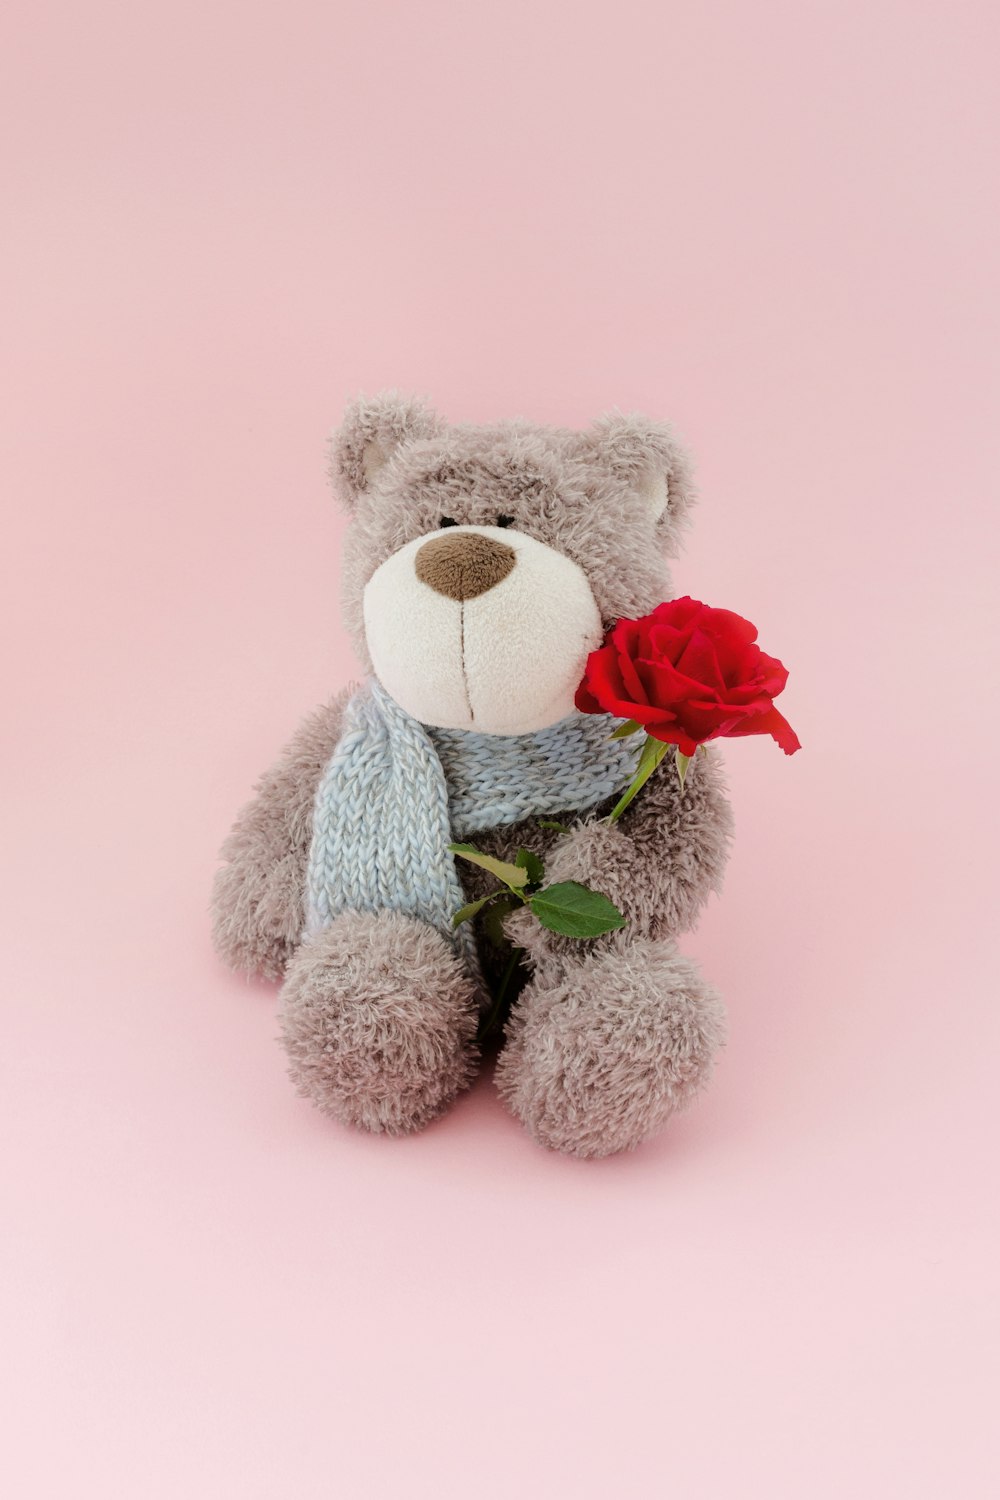 a gray teddy bear holding a red rose